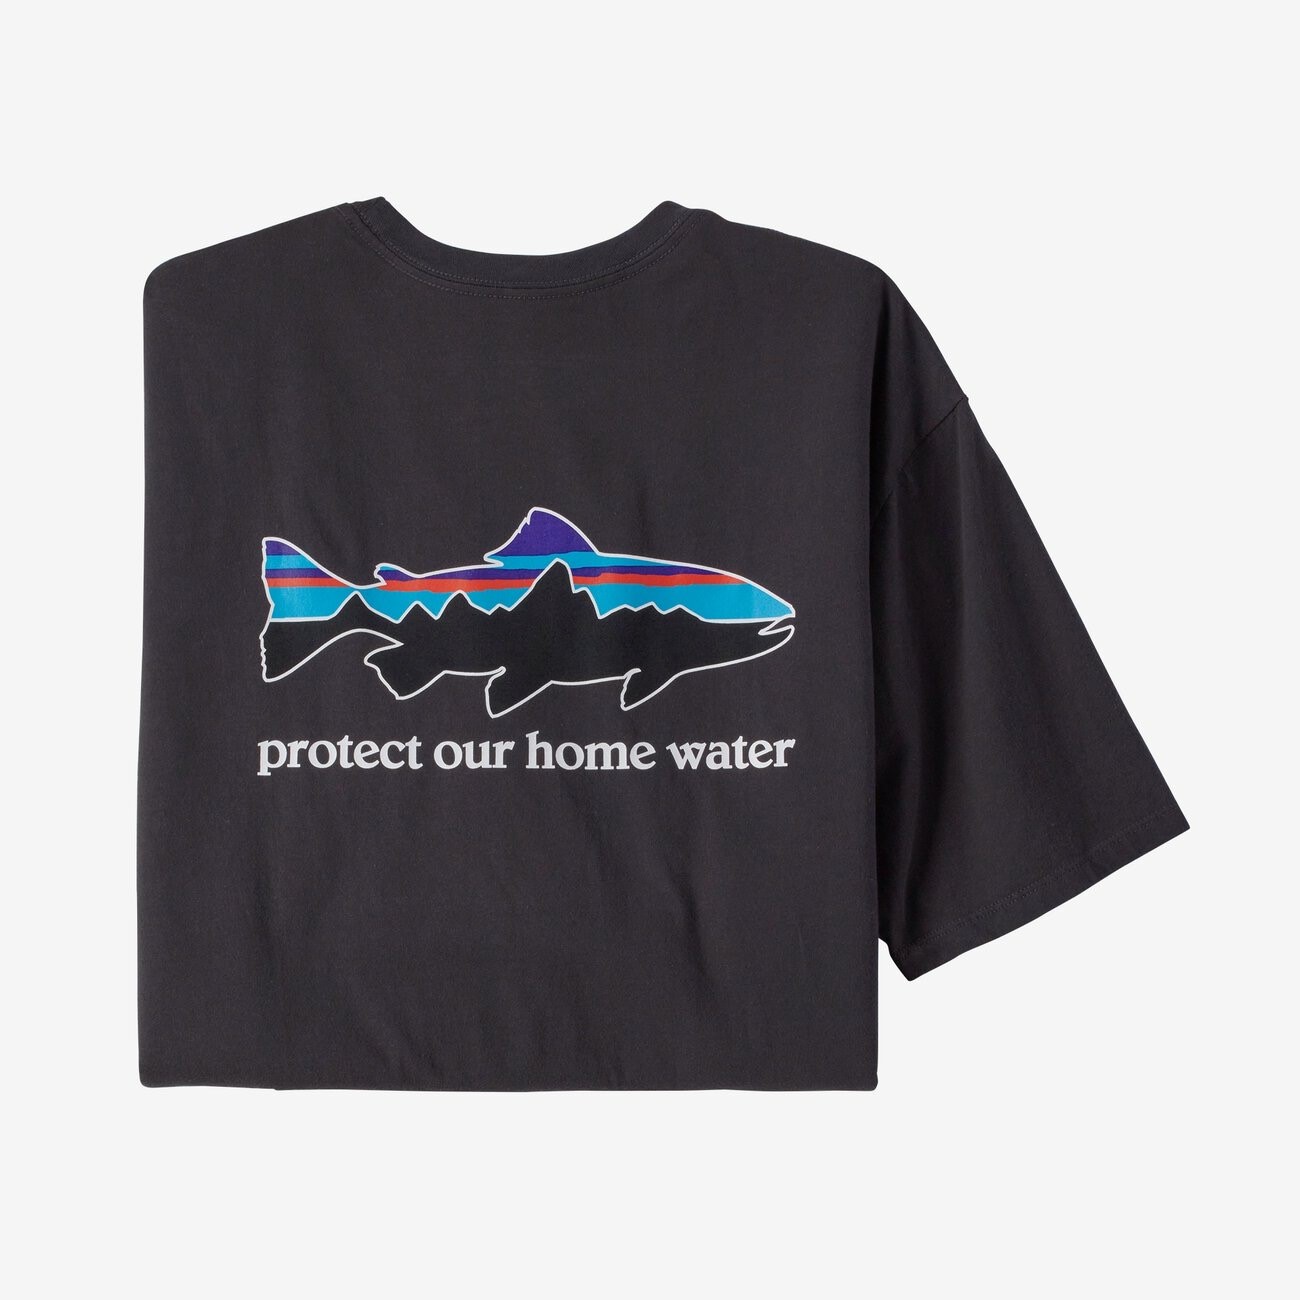 Patagonia M's Home Water Trout Organic T-Shirt - Ink Black - Small